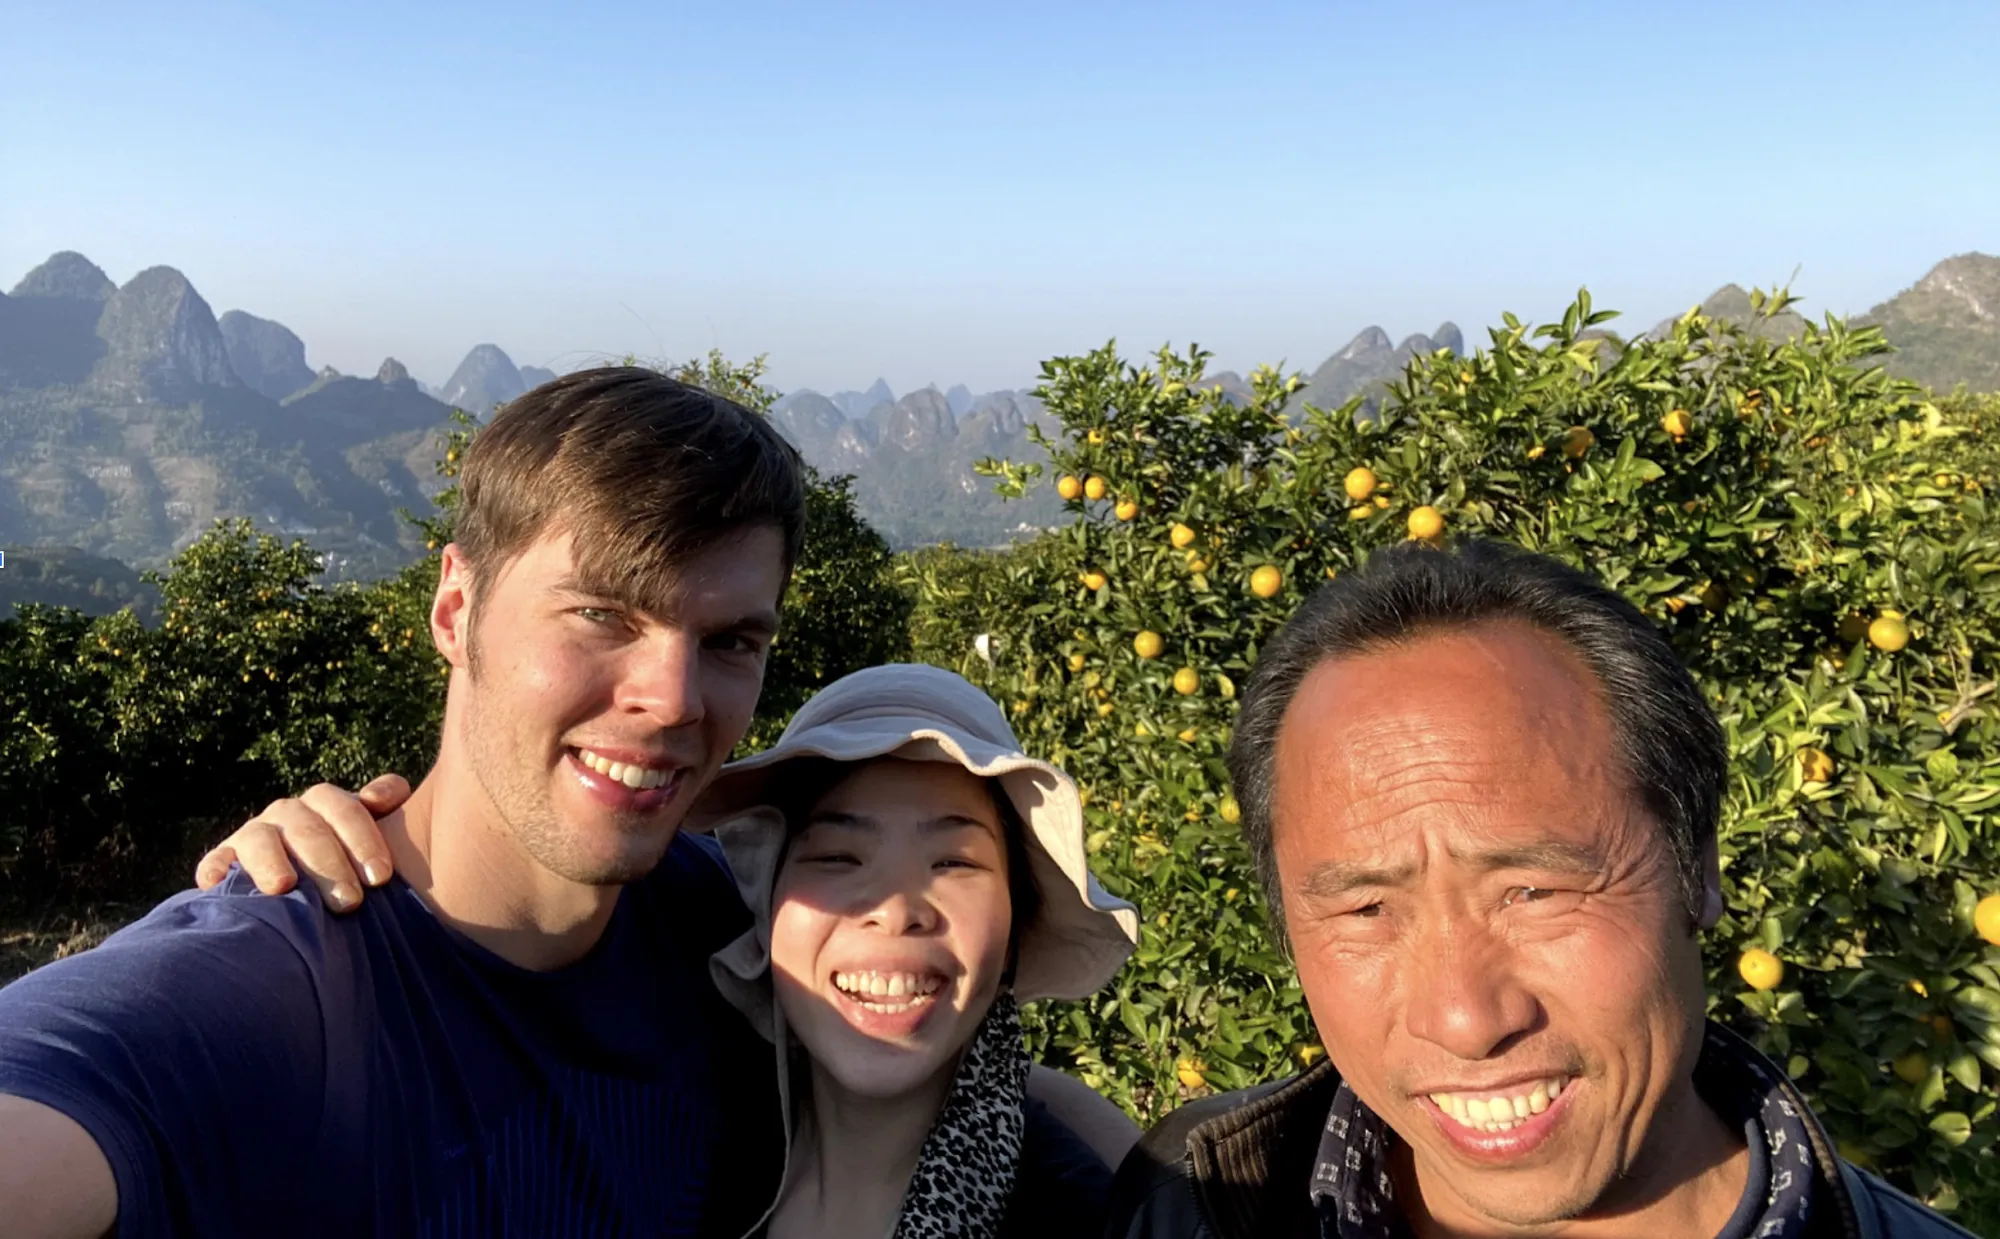 The Zettelkasten system was one of the tools helping me become fluent in Chinese, helping me to finally achieve the great feat of taking a picture with my father-in-law ;)